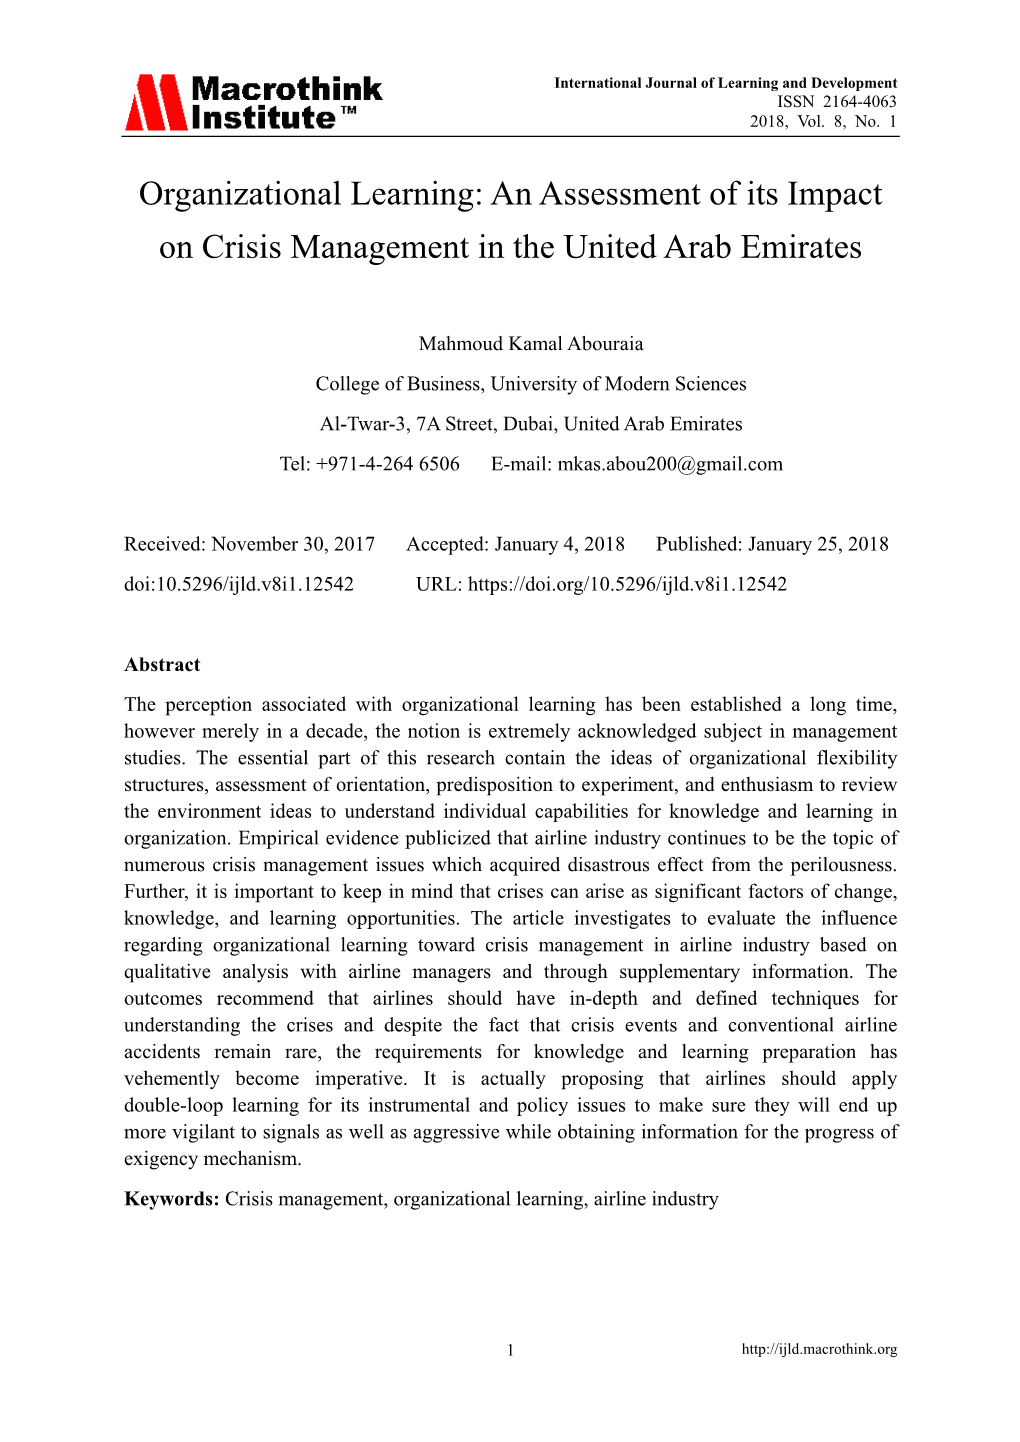 Organizational Learning: an Assessment of Its Impact on Crisis Management in the United Arab Emirates